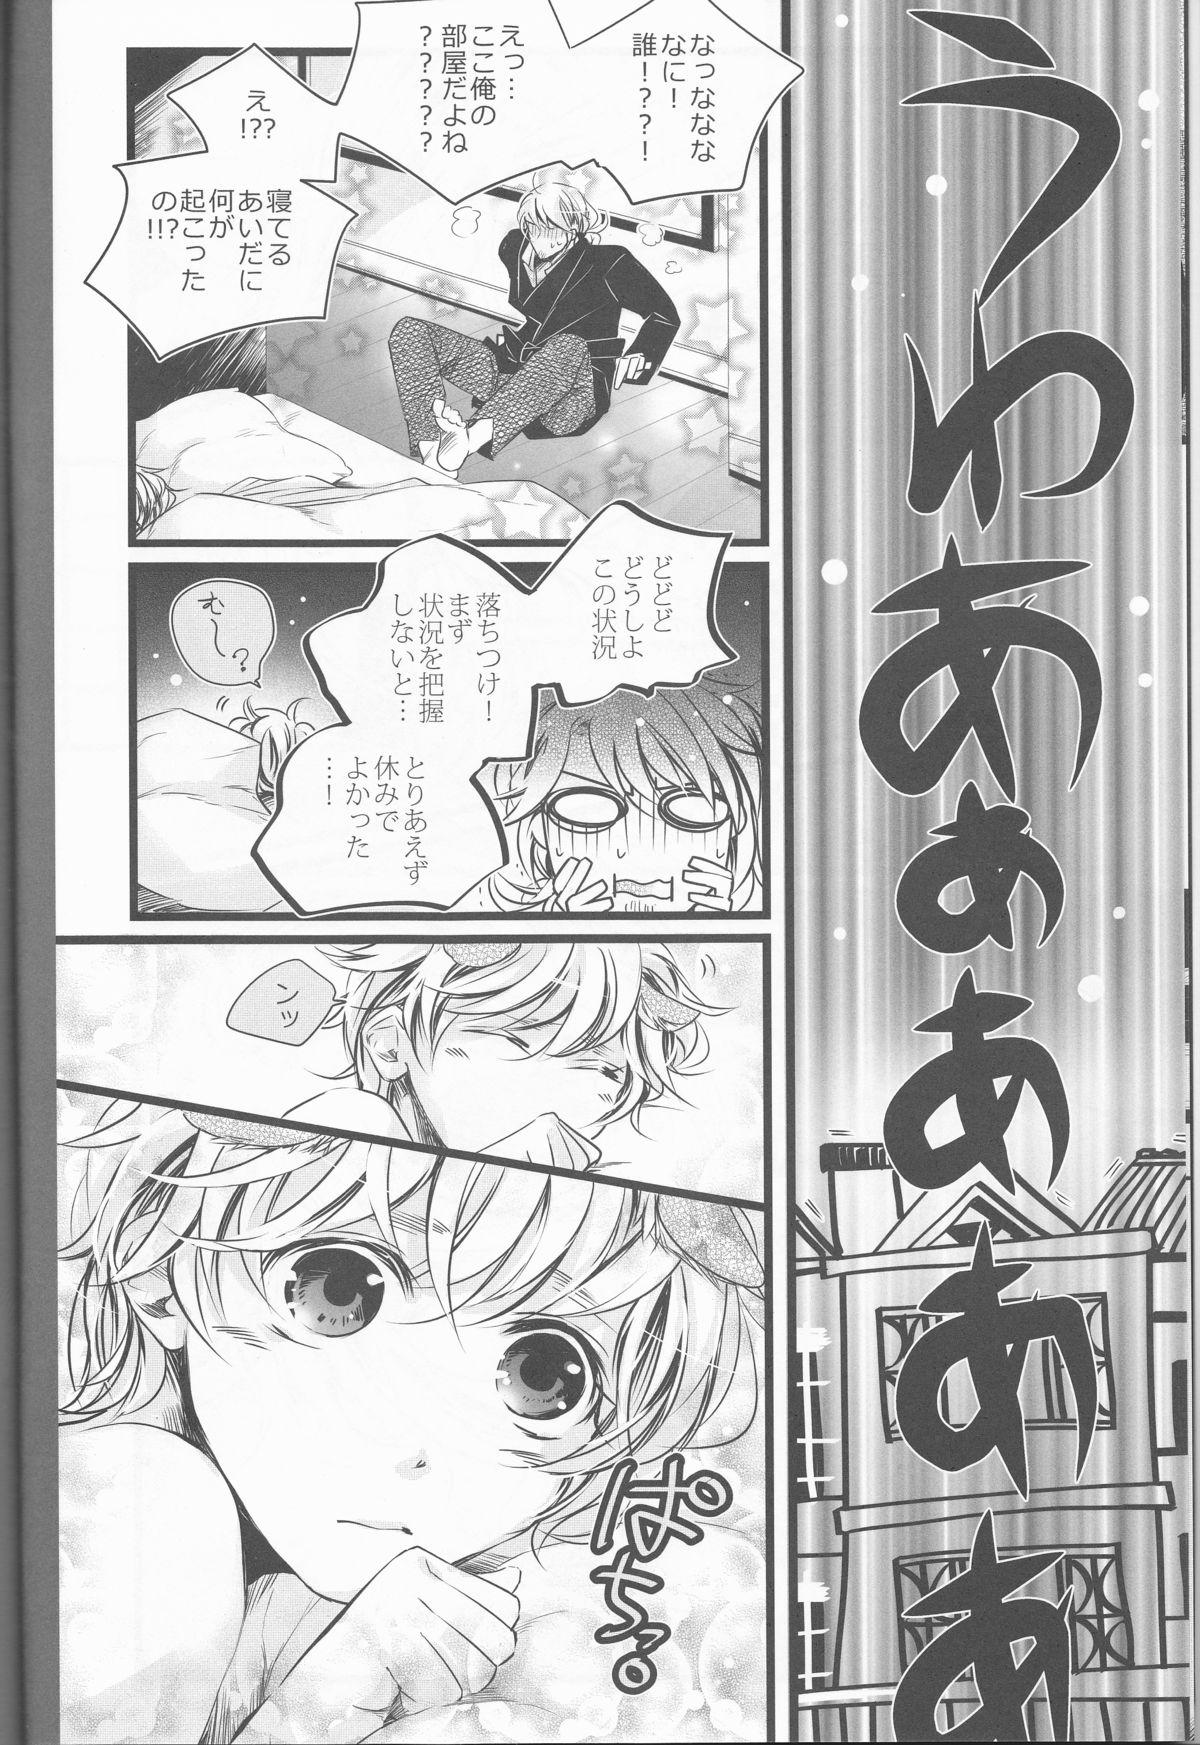 Free Fuck Clips ]Bell the cat! - Axis powers hetalia Hot Girls Getting Fucked - Page 7